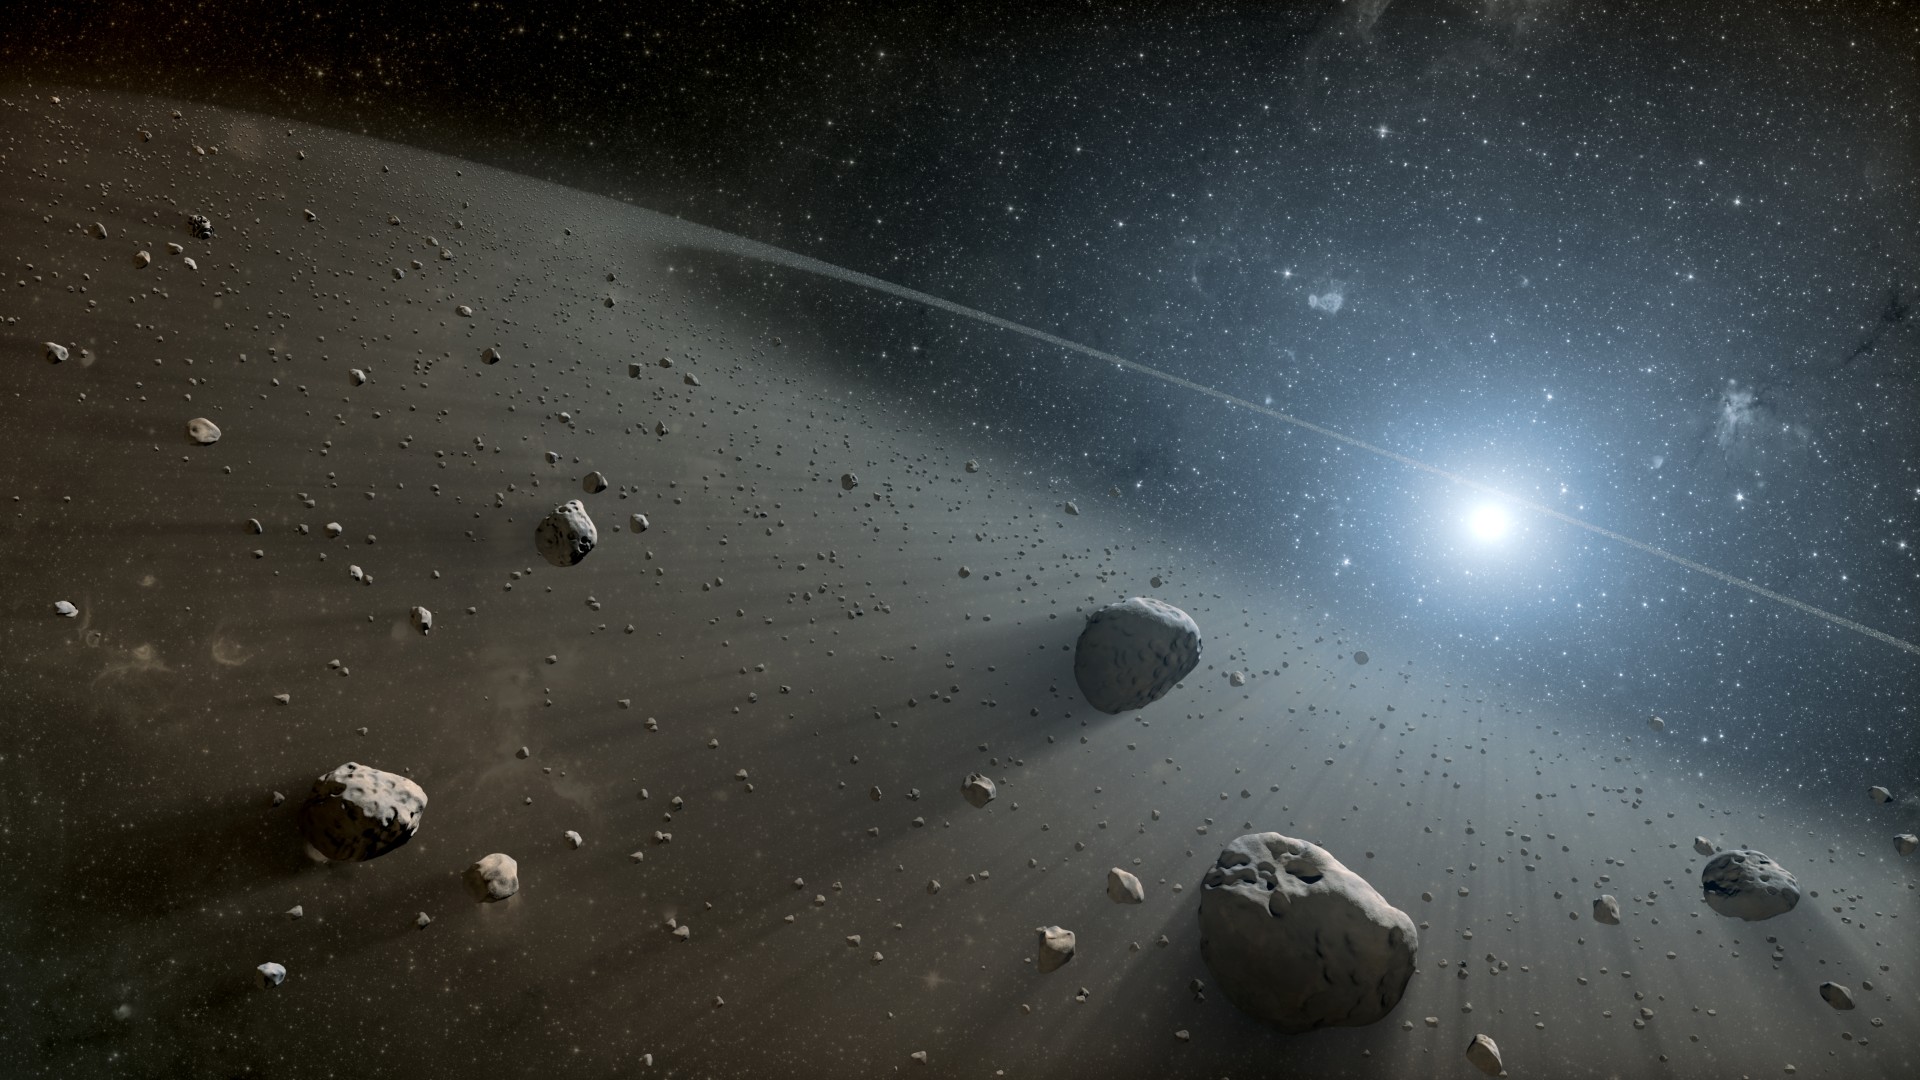 Here, we see a large number of various asteroids floating in space.